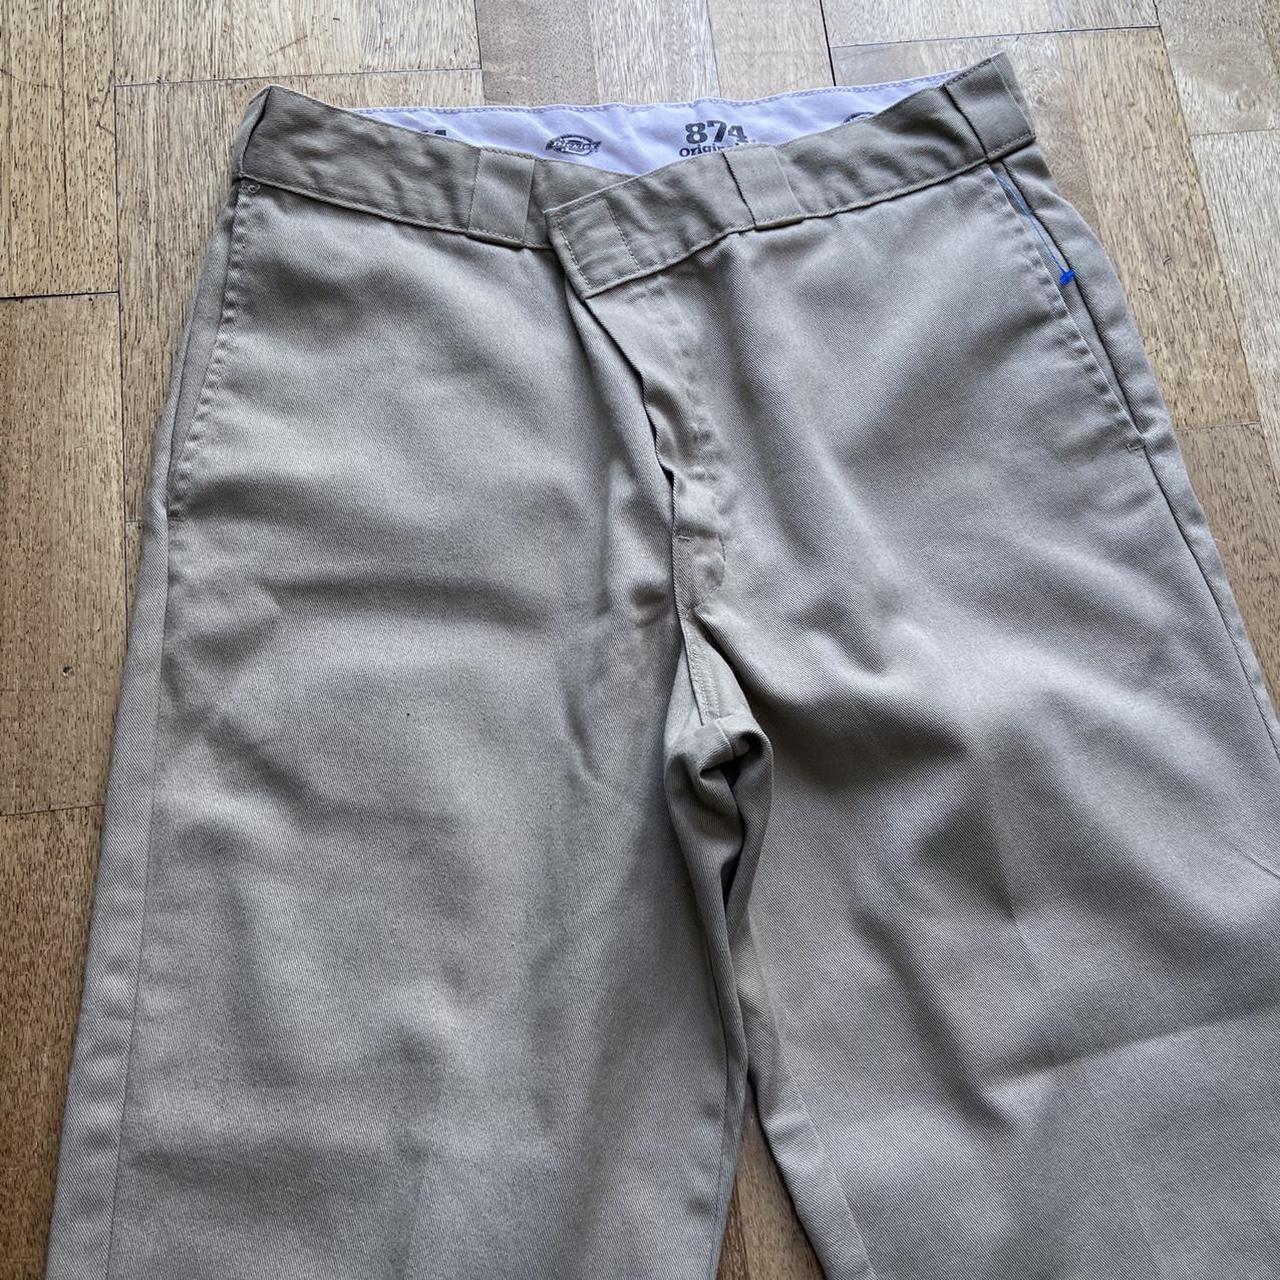 Product Image 2 - Vintage Dickies 874 trousers pants
Color